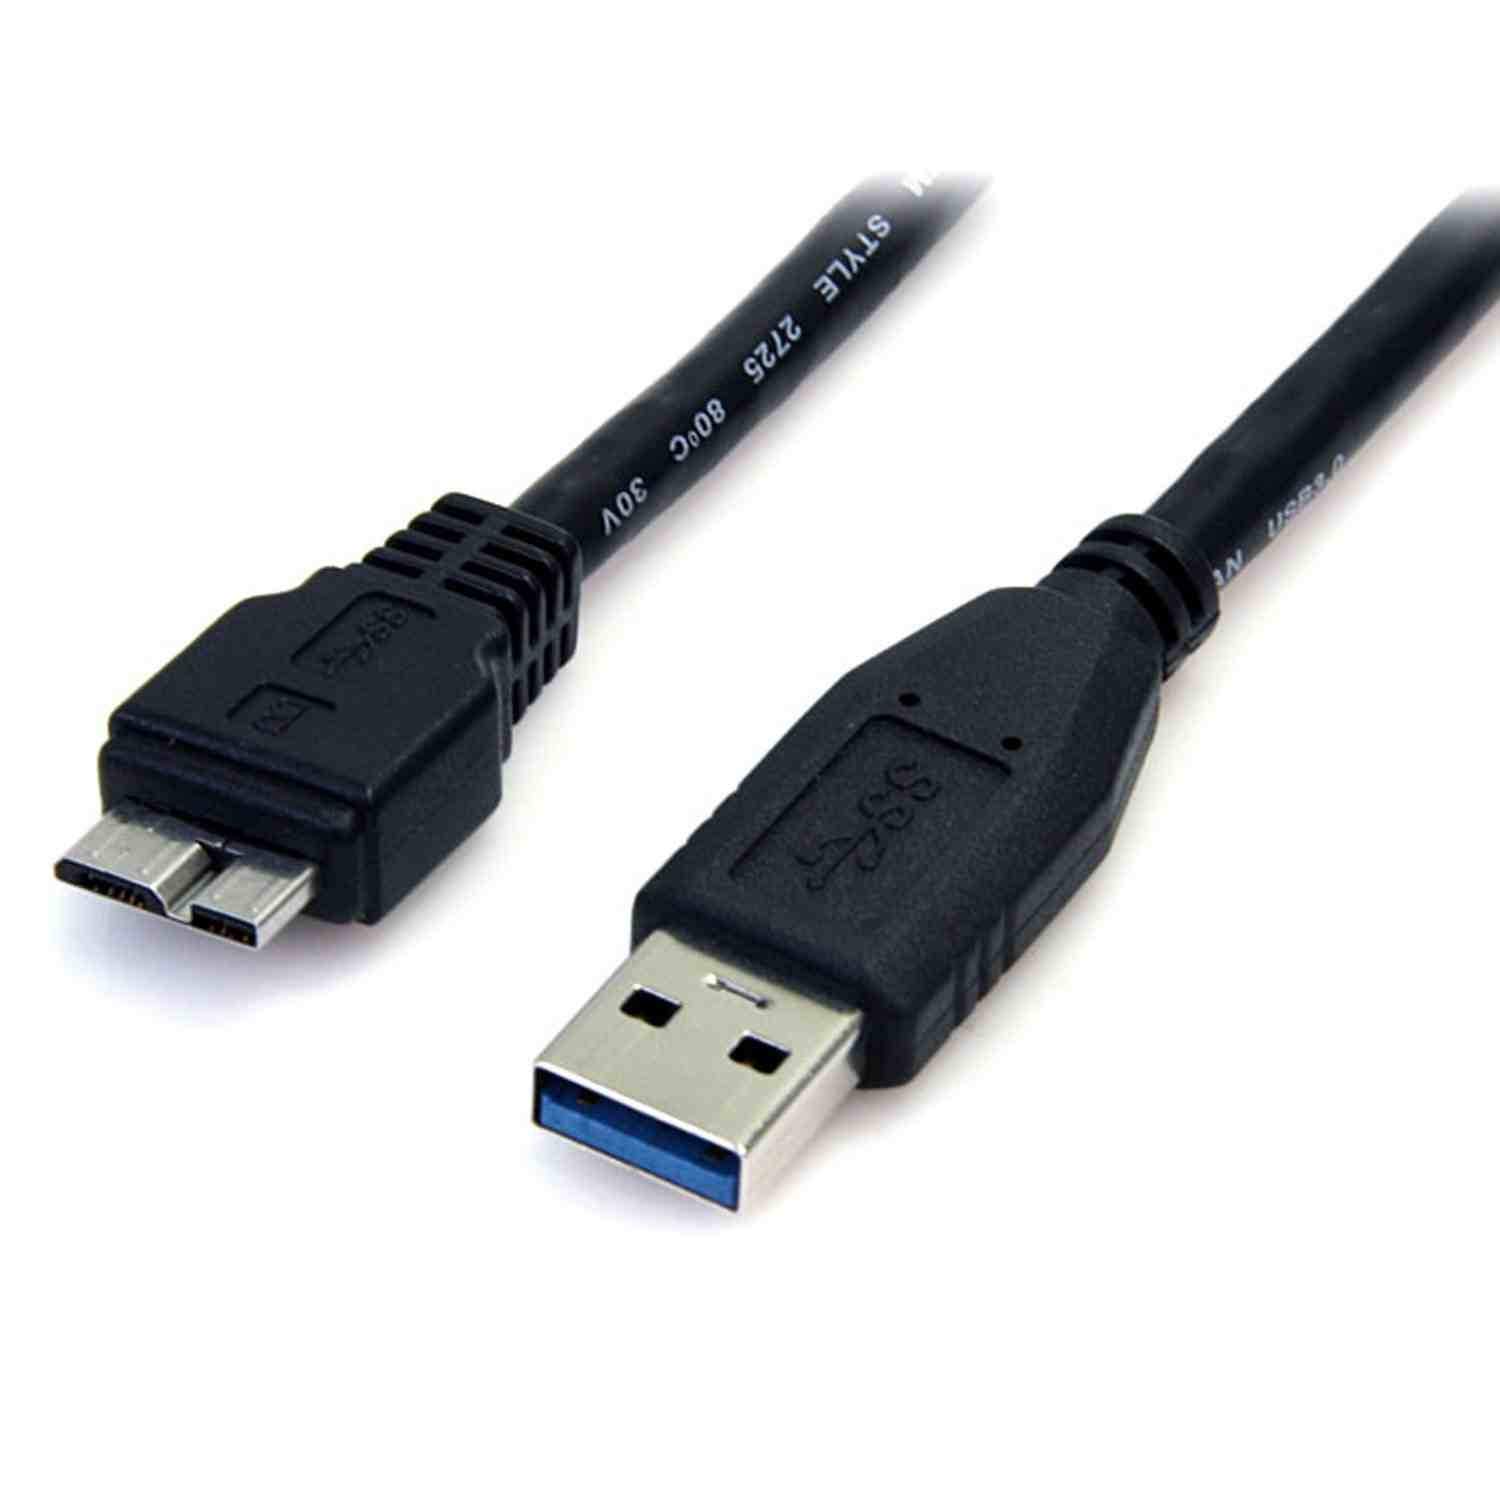 USB cable for Nikon D810